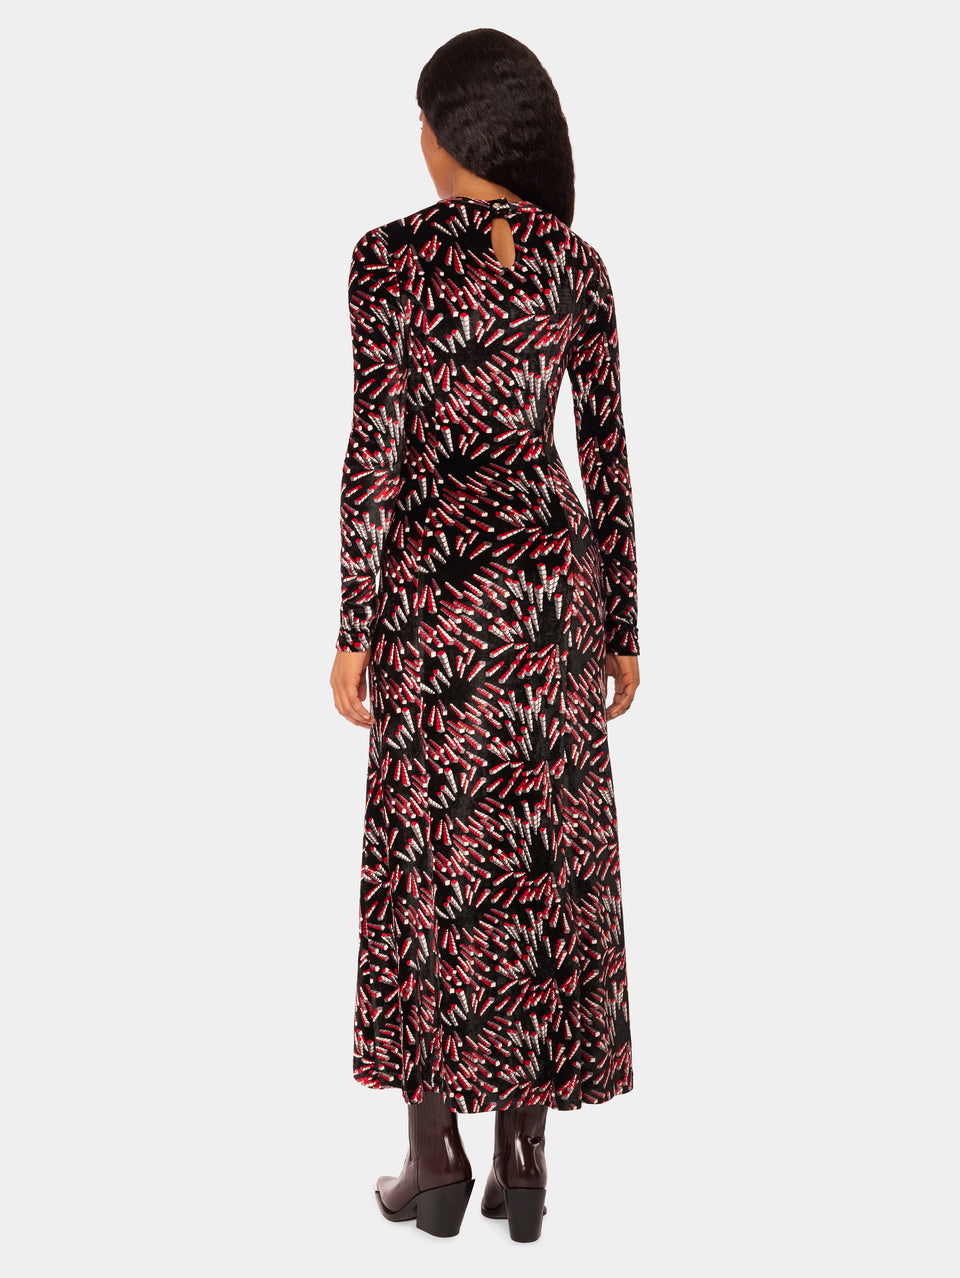 Printed long dress in jersey